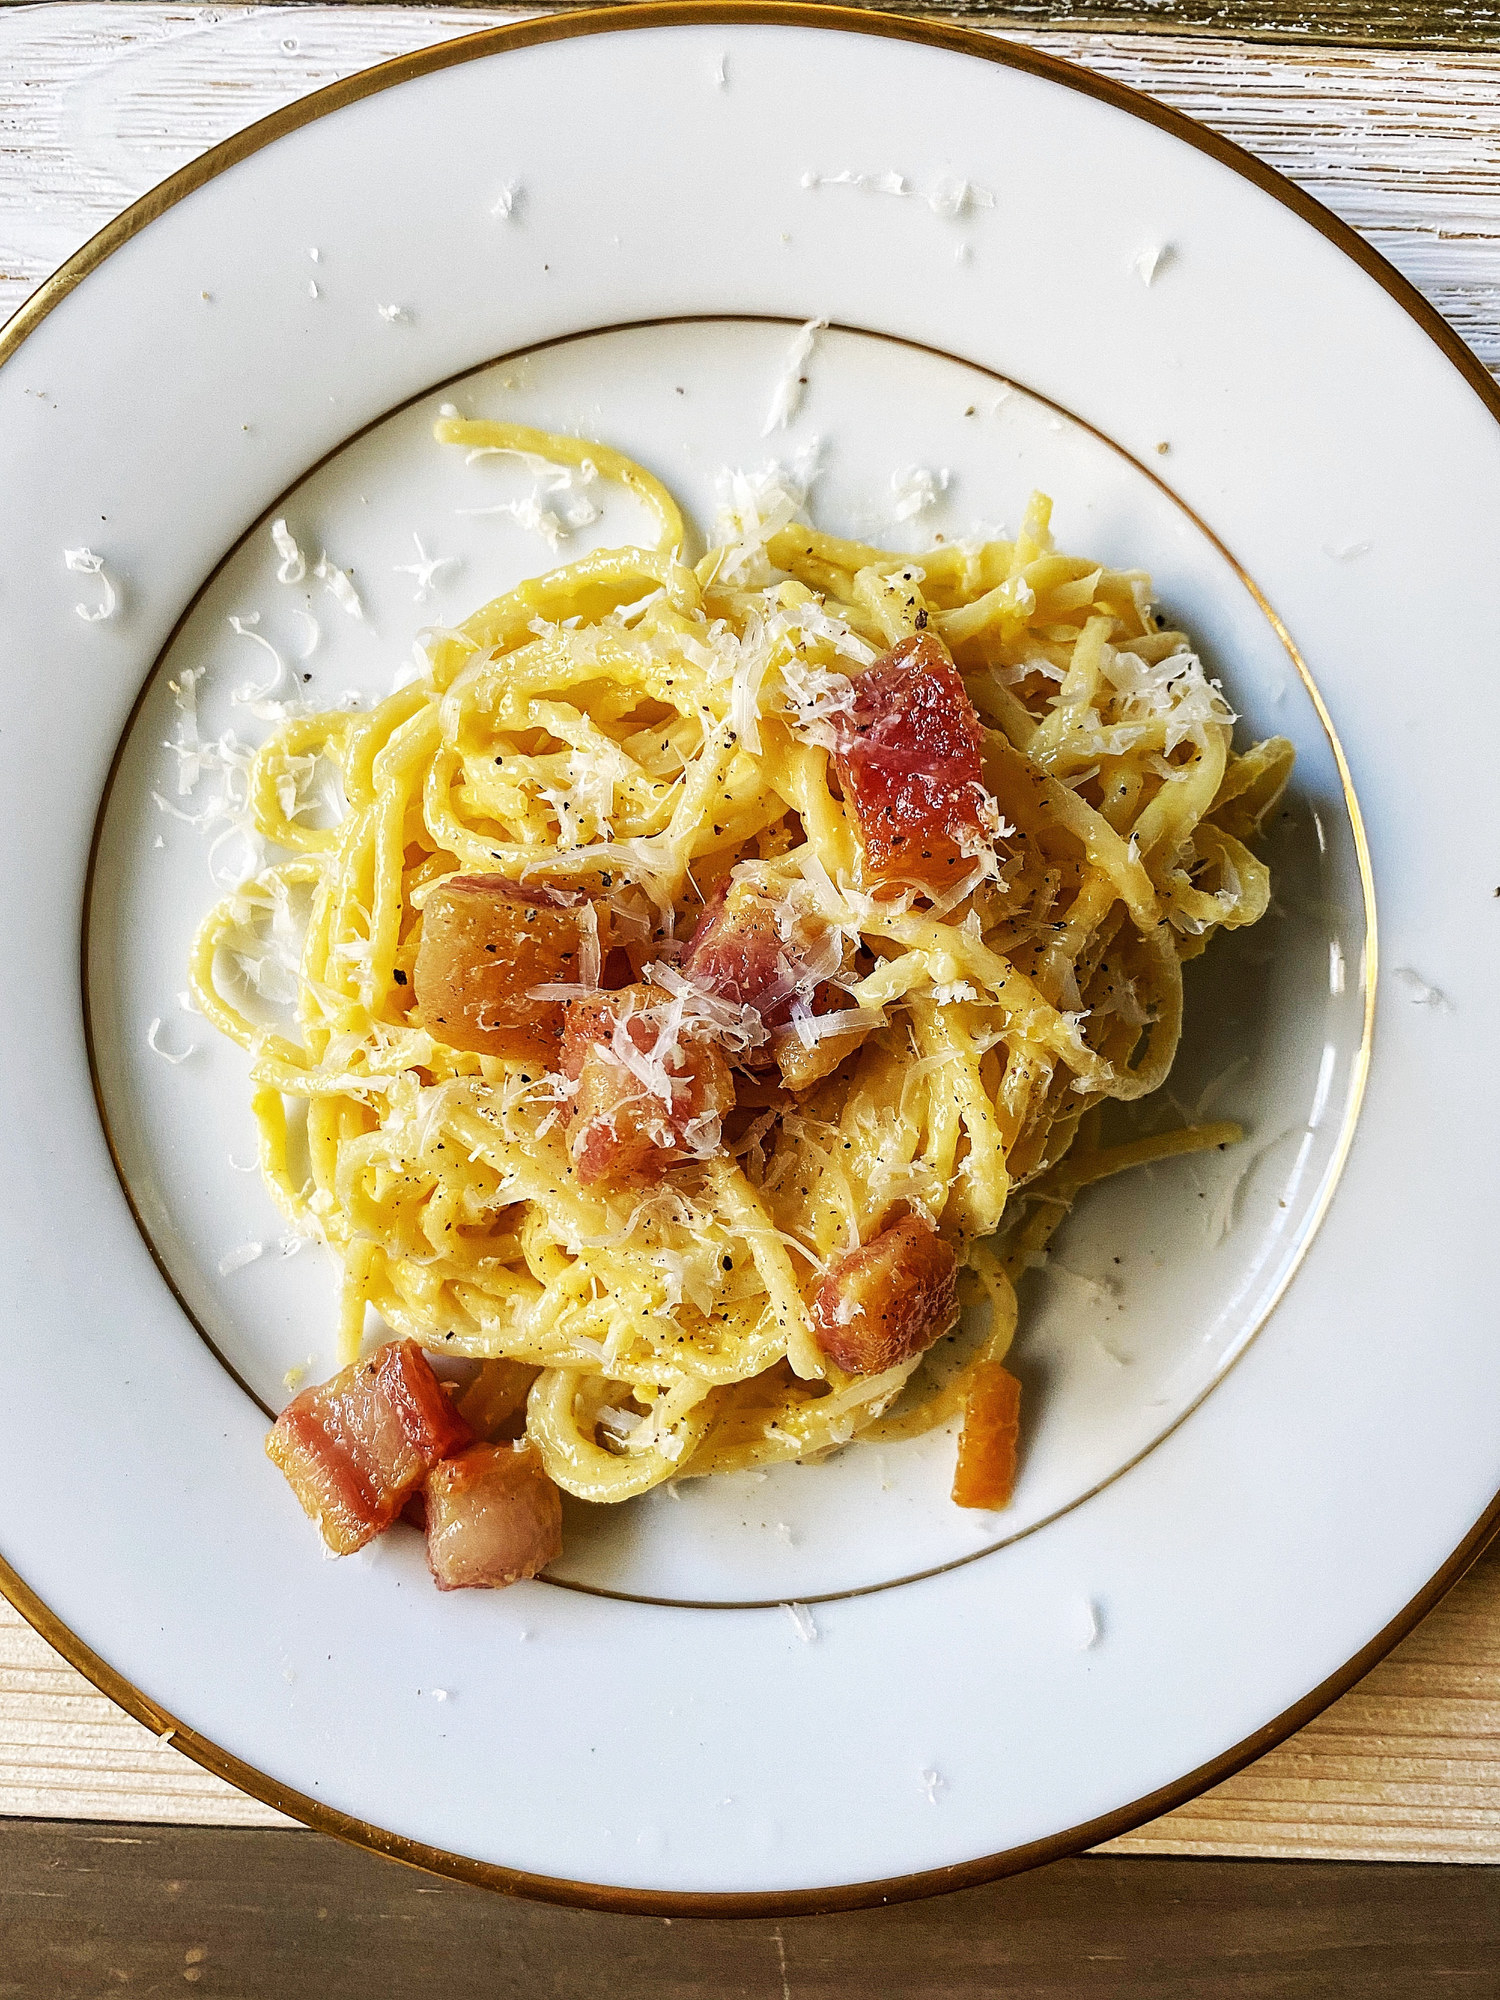 A plate of spaghetti carbonara with pancetta.